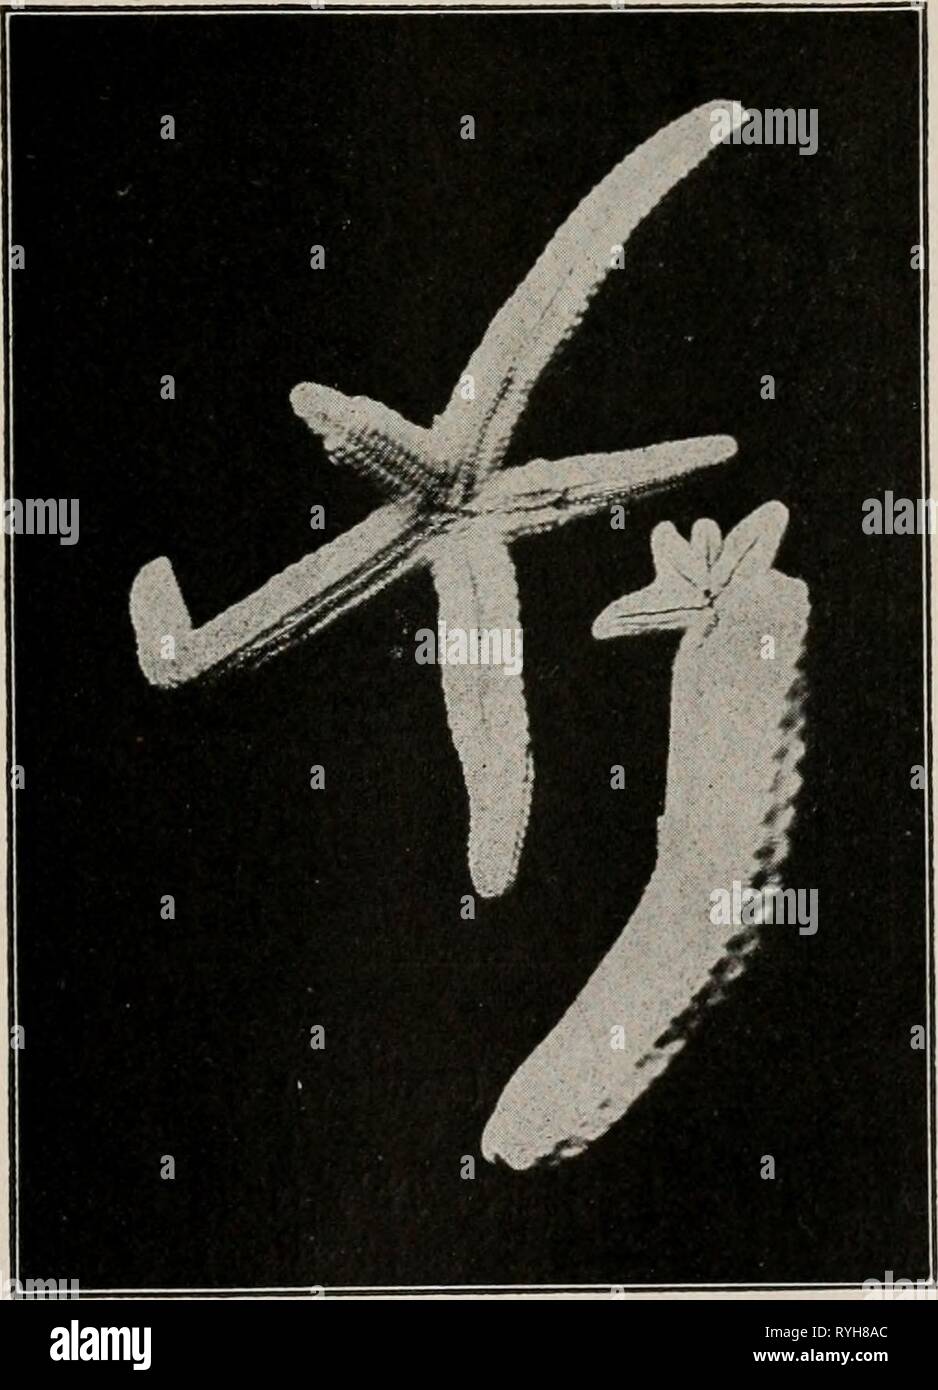 Elementary textbook of economic zoology and entomology  elementarytextbo00kell Year: [c1915]  STARFISHES, SEA-URCHINS, ETC. 93 large to be taken into its mouth the stomach is extended through the mouth and the living prey is covered over by it. As soon as the shell is opened ever so little the soft parts of the victim are sucked up and digested by the starfish. Having finished its meal the starfish draws its stomach in and seeks another oyster or clam.    FIG. 33.—Regeneration of starfishes, Linckia sp. Upper figure shows a starfish regenerating arms that have been lost; the lower figure shows Stock Photo